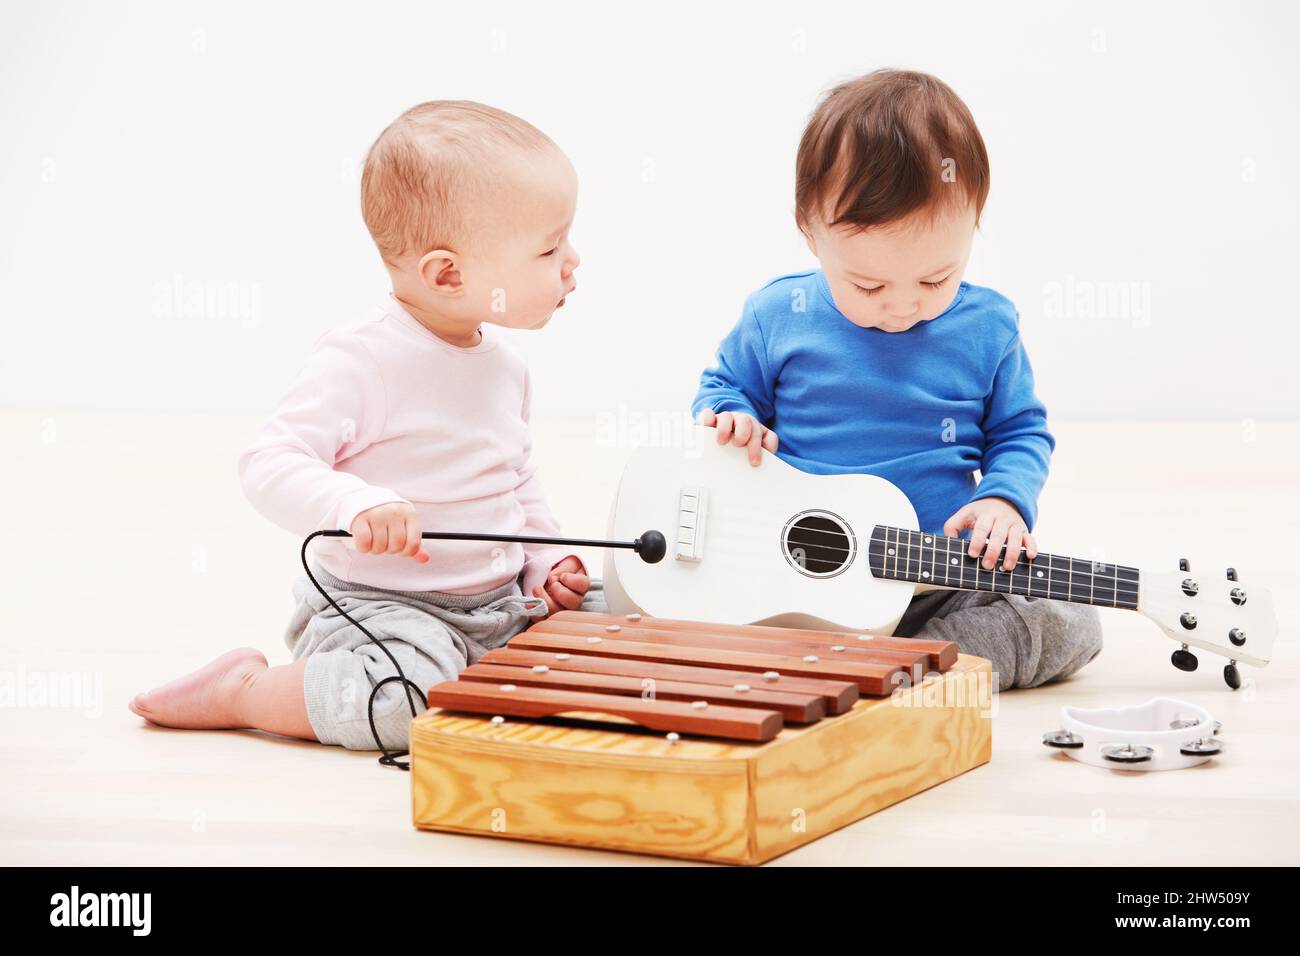 They have the makings of a successful band. Shot of two adorable babies playing with toy musical instruments. Stock Photo